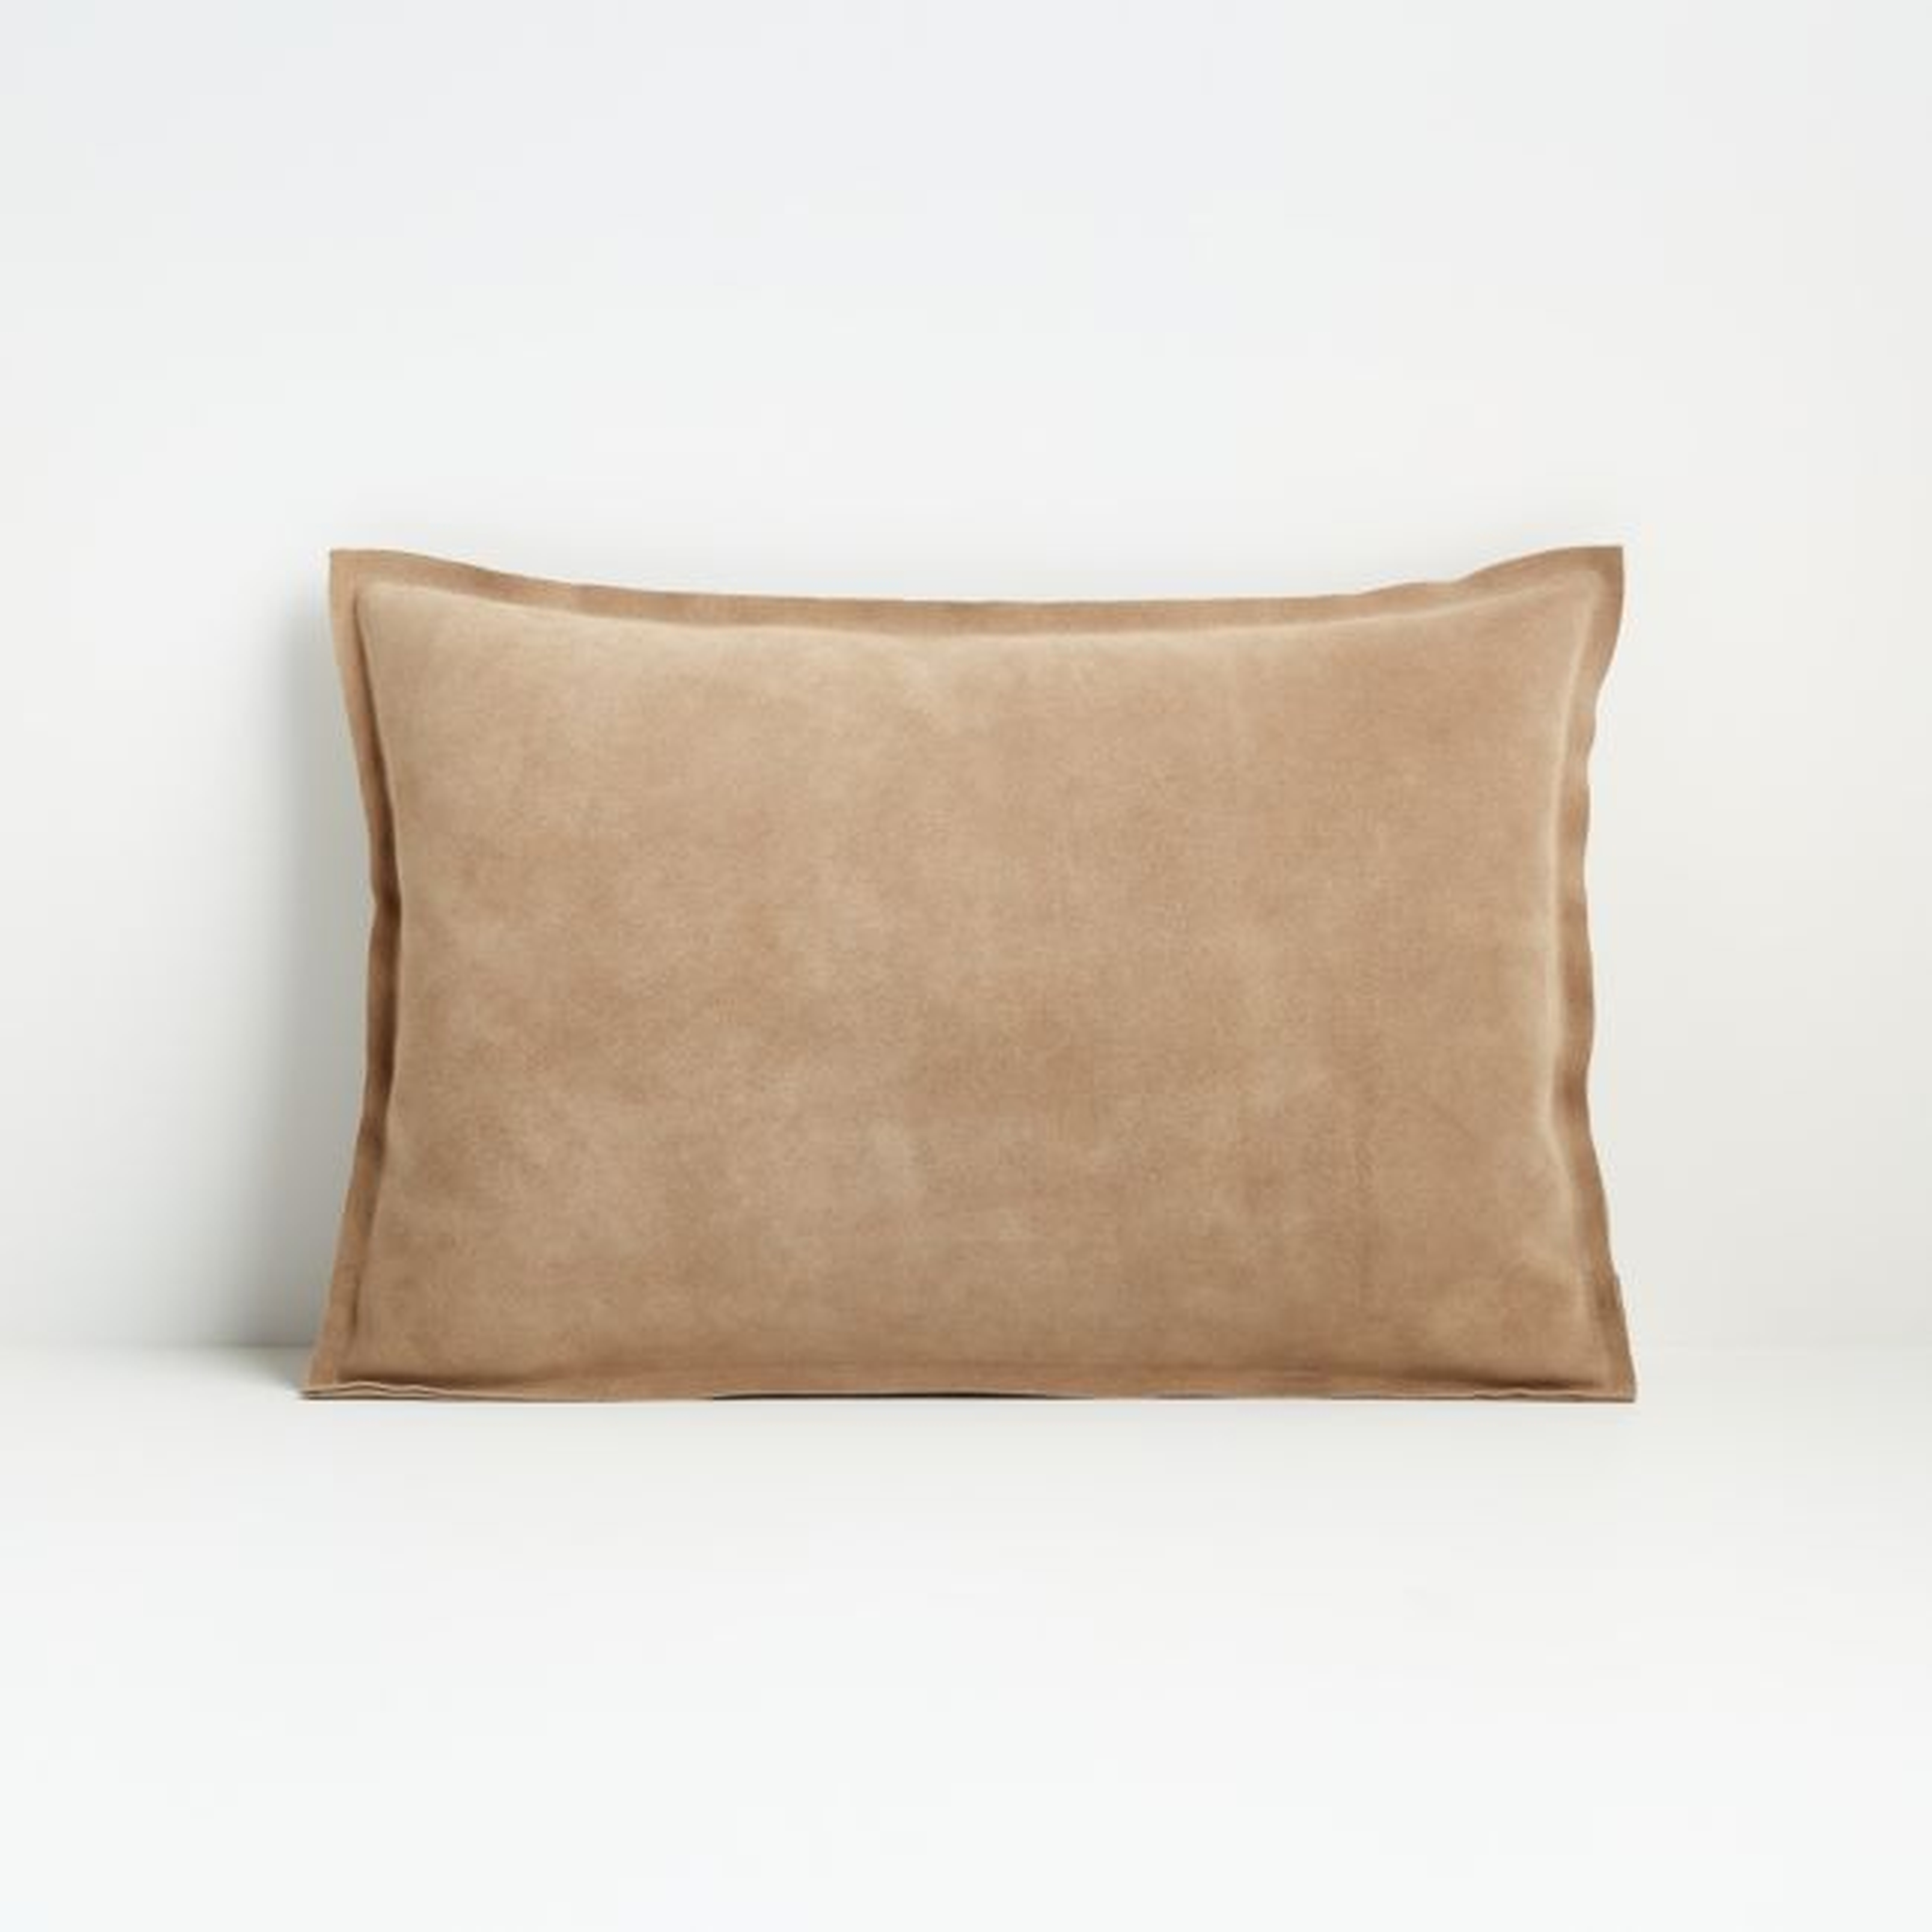 Camito Pebble 18"x12" Suede Pillow with Feather-Down Insert - Crate and Barrel